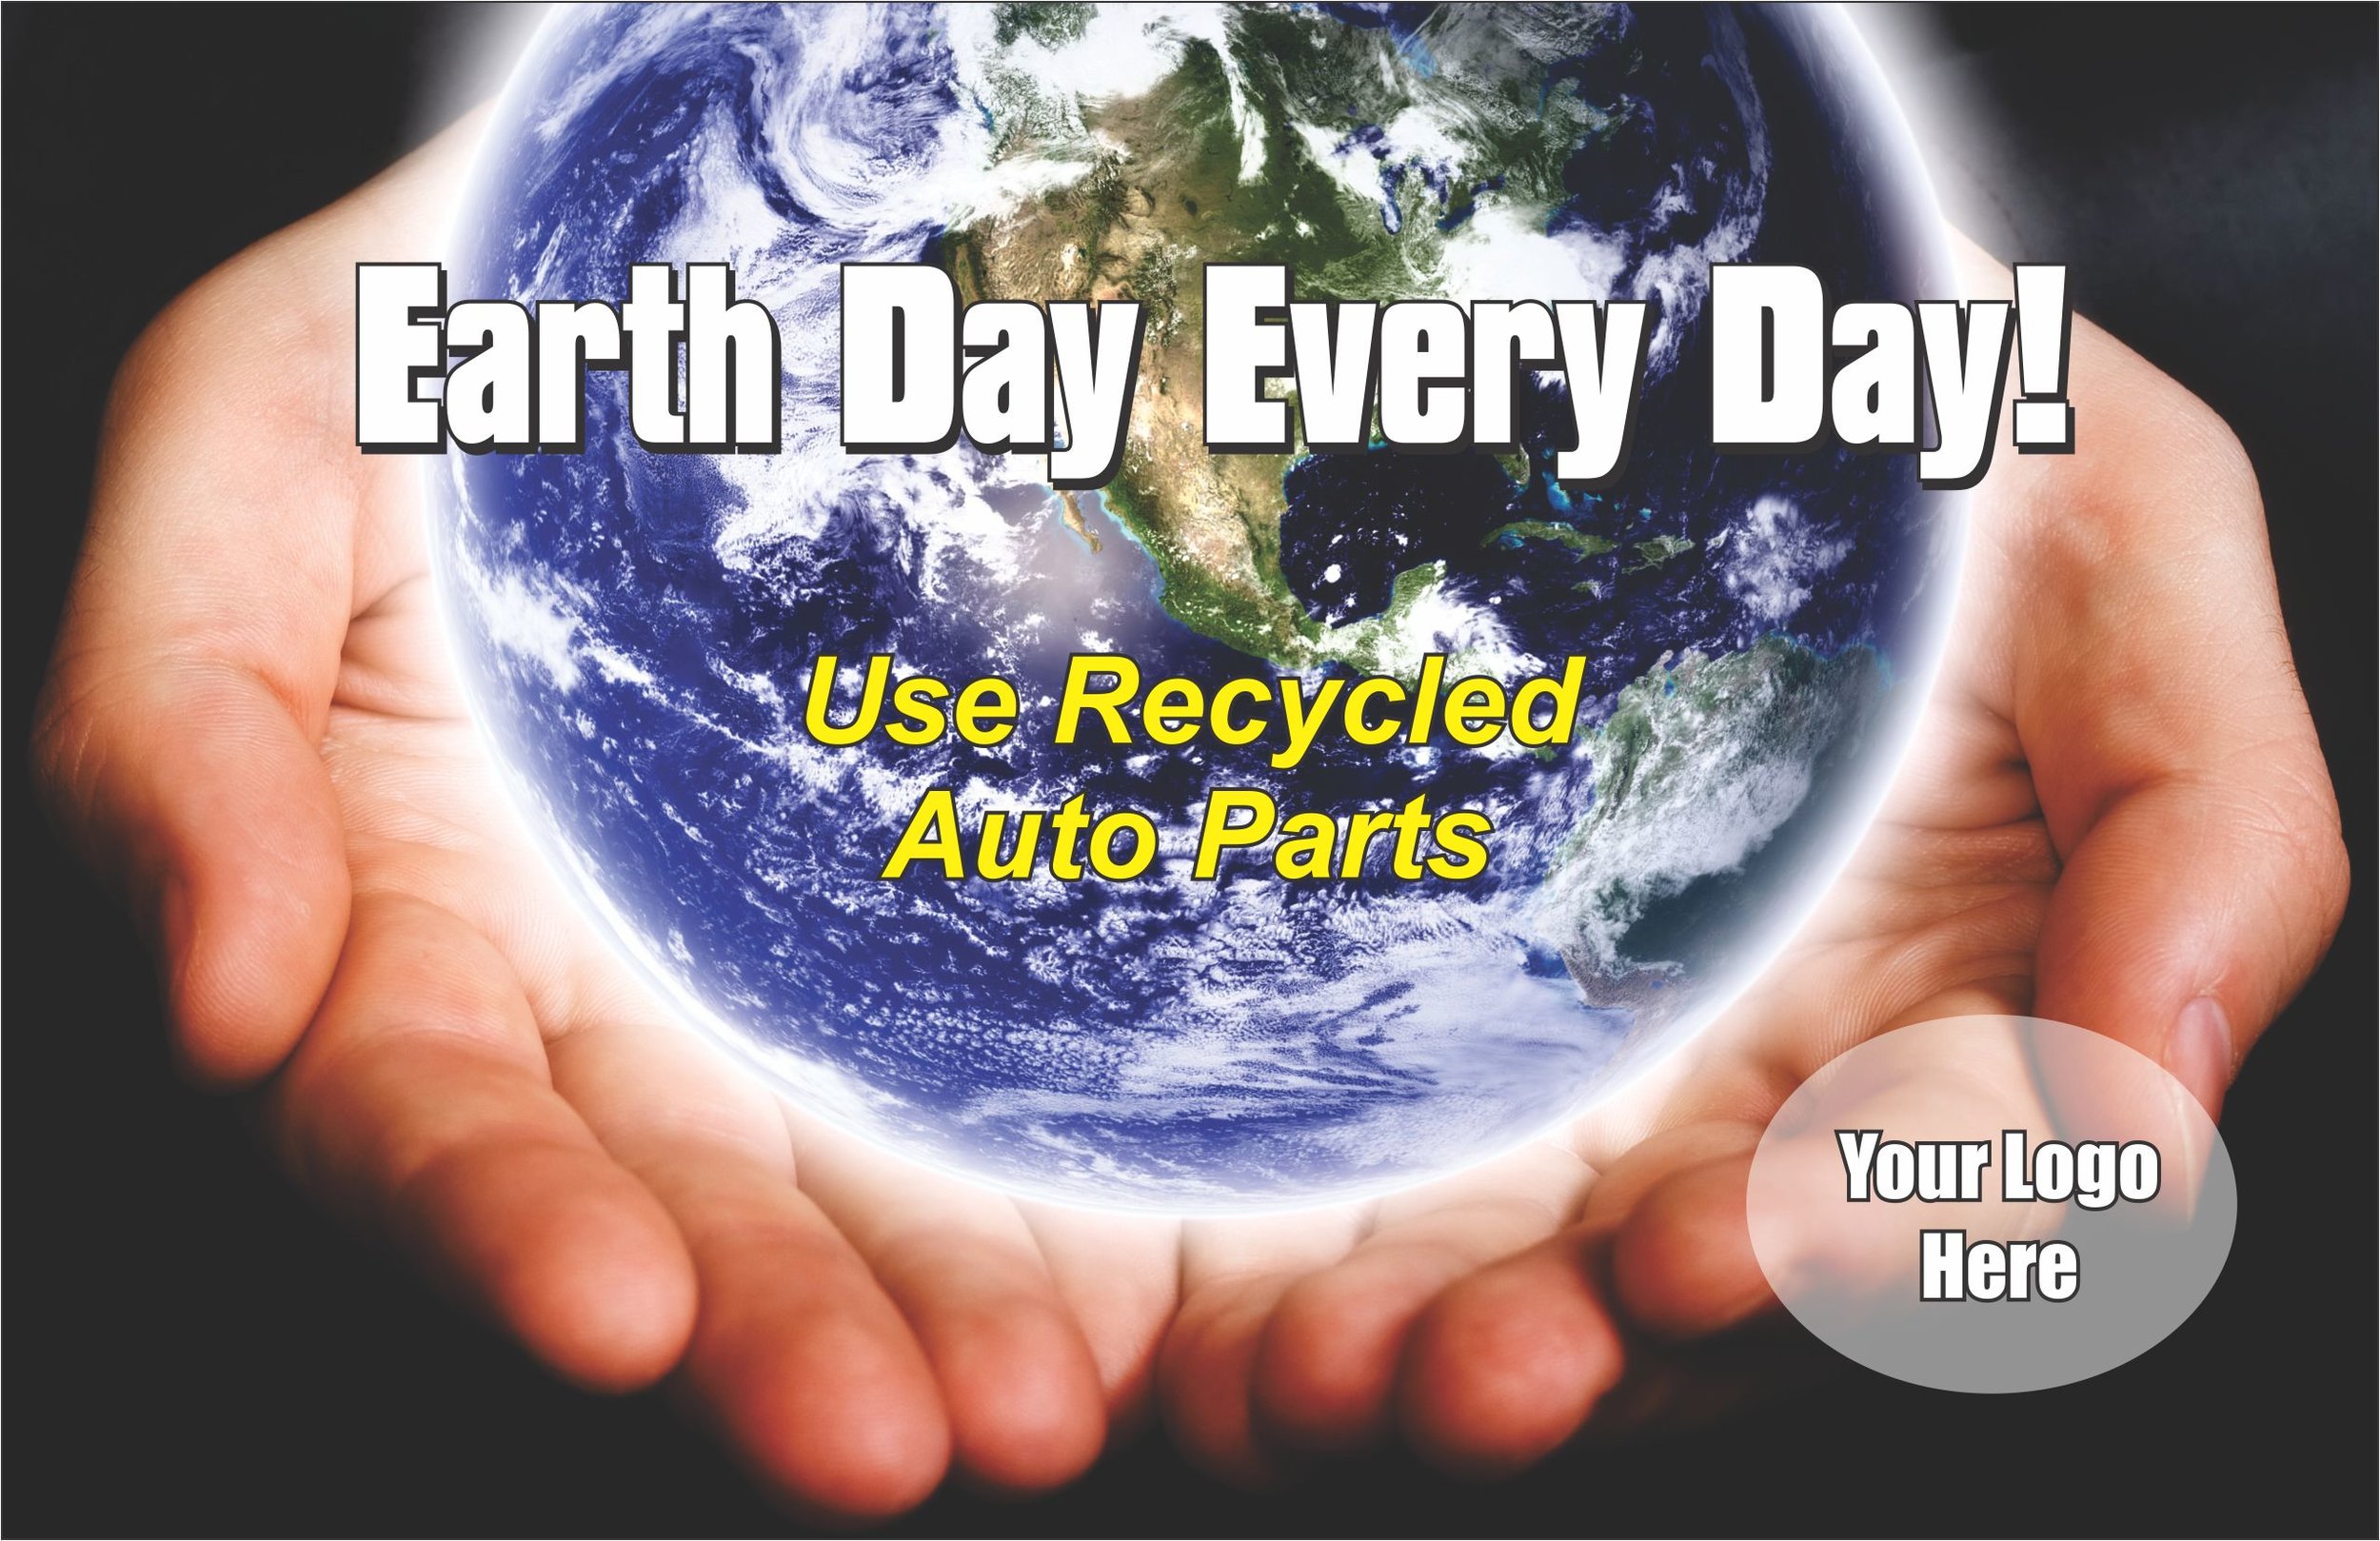 Earth Day Every Day 2.jpg